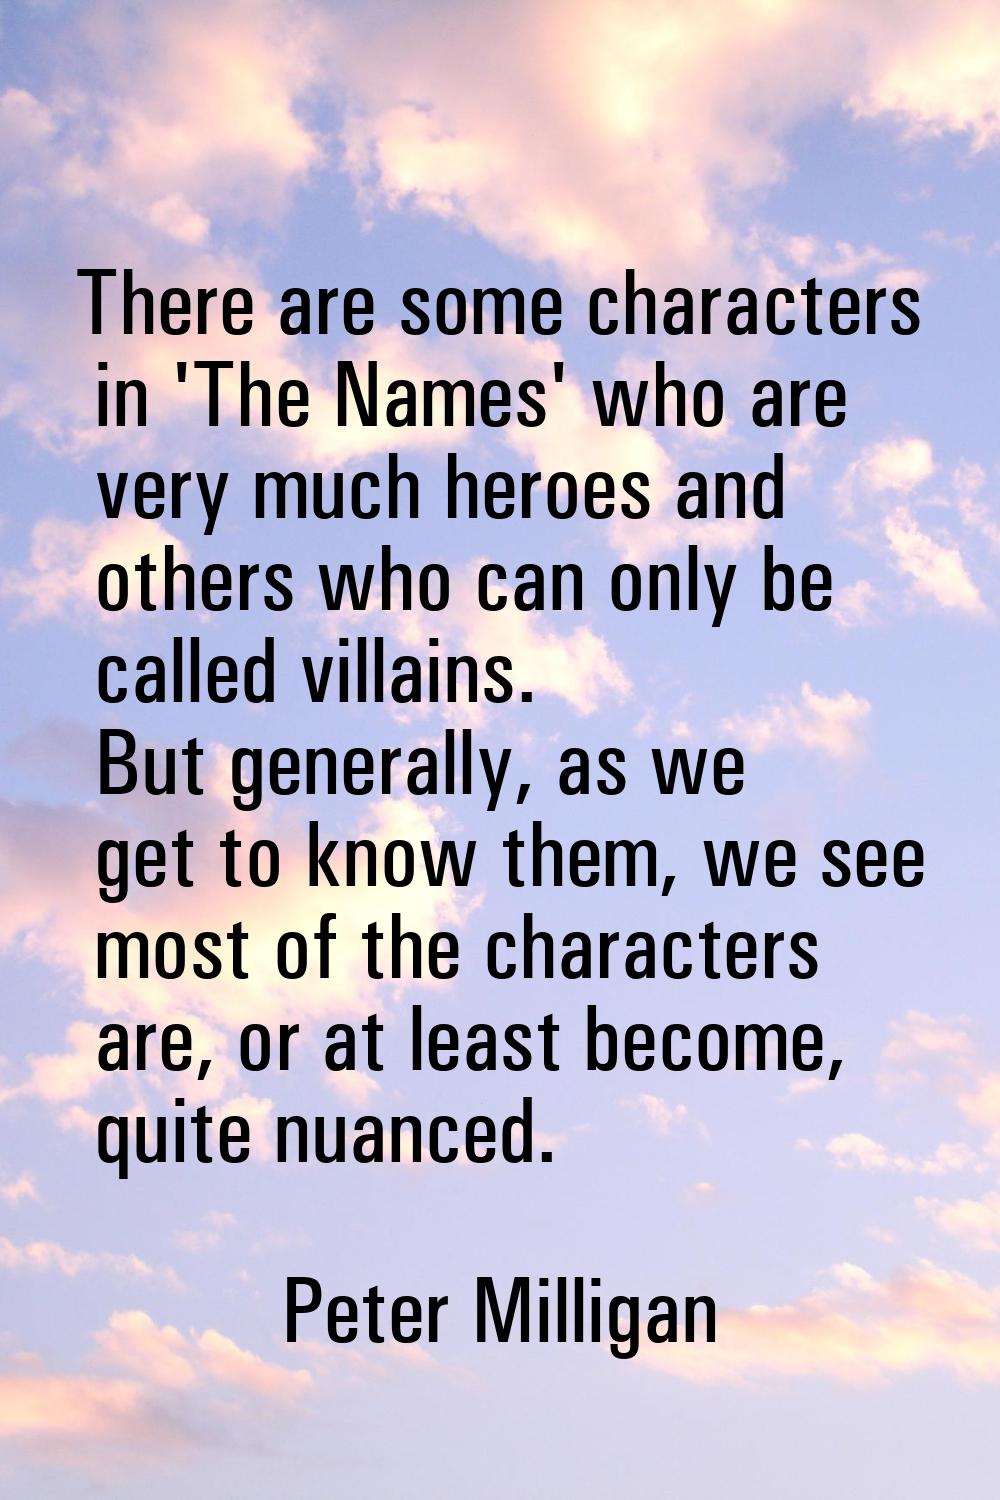 There are some characters in 'The Names' who are very much heroes and others who can only be called